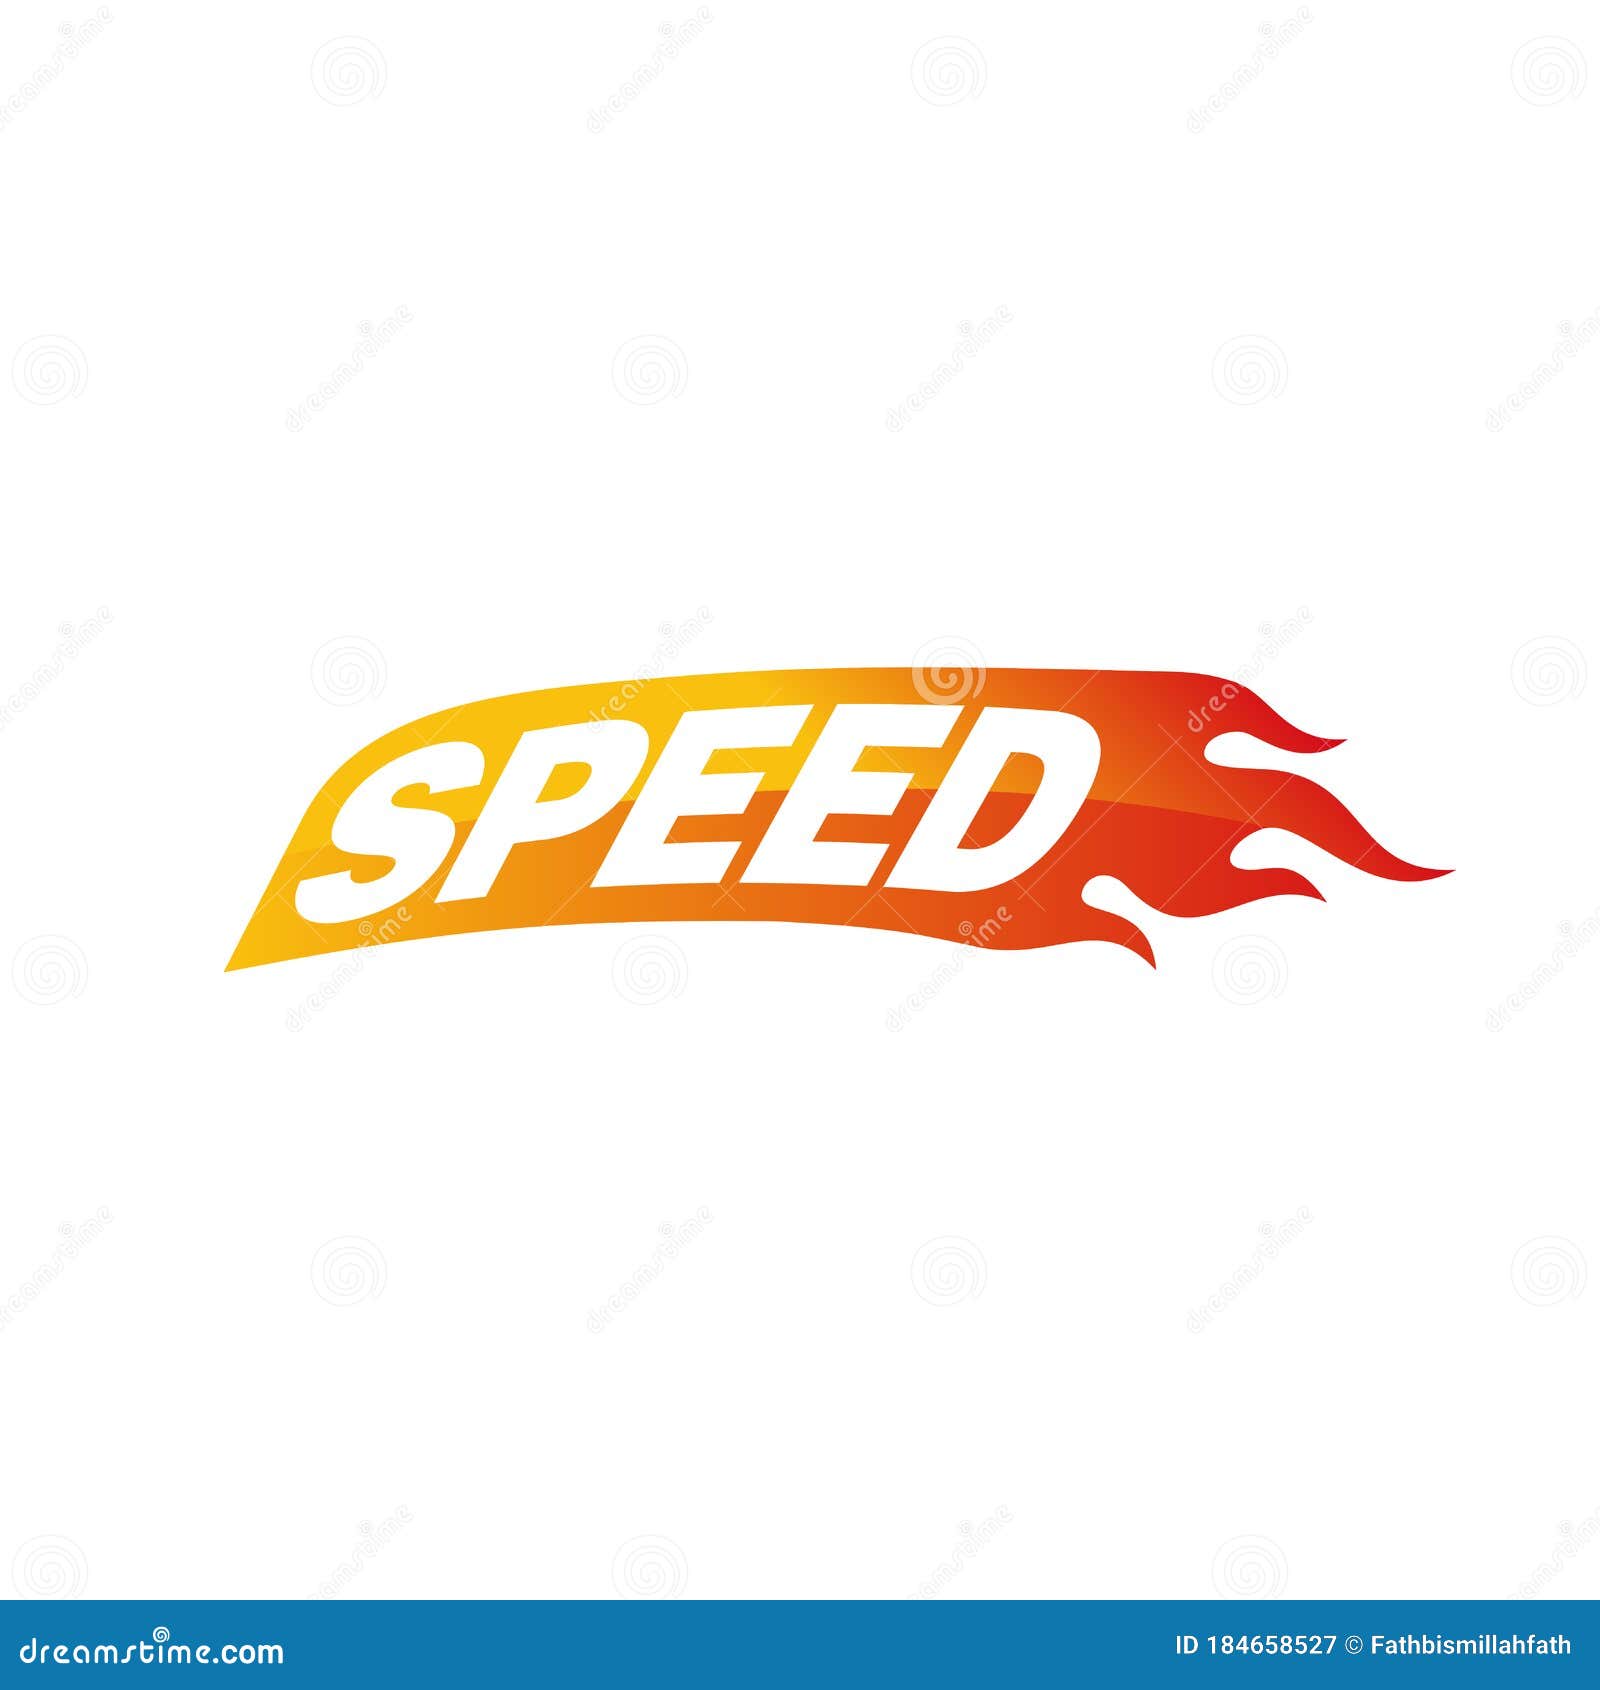 Speed With Flame Fire Logo Design Inspiration Automotive Logo Speed Fire Logotype Stock Vector Illustration Of Fast Design